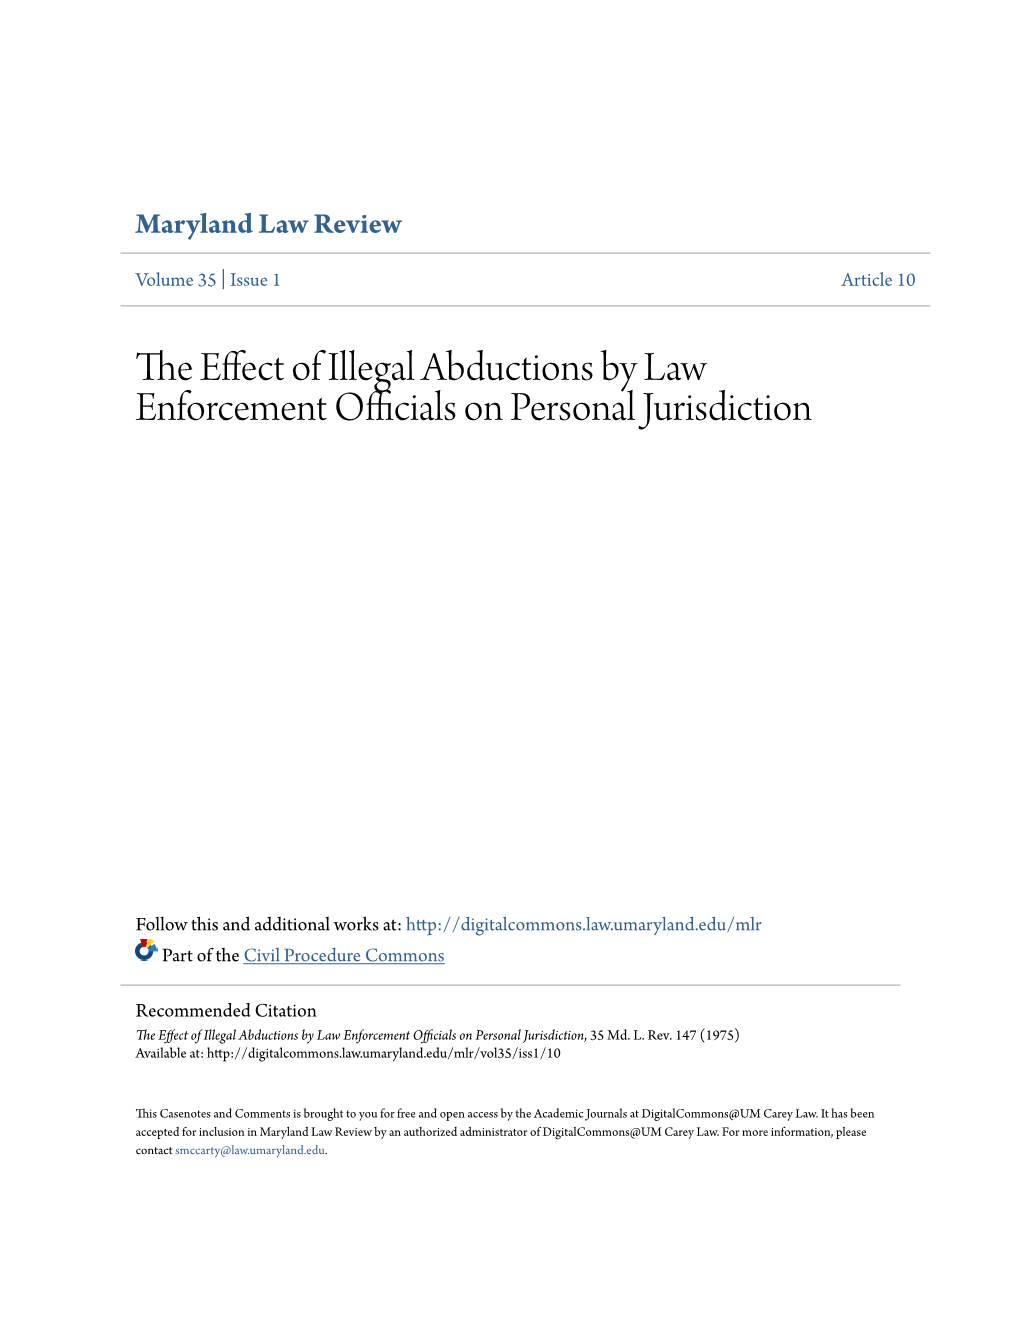 The Effect of Illegal Abductions by Law Enforcement Officials on Personal Jurisdiction, 35 Md